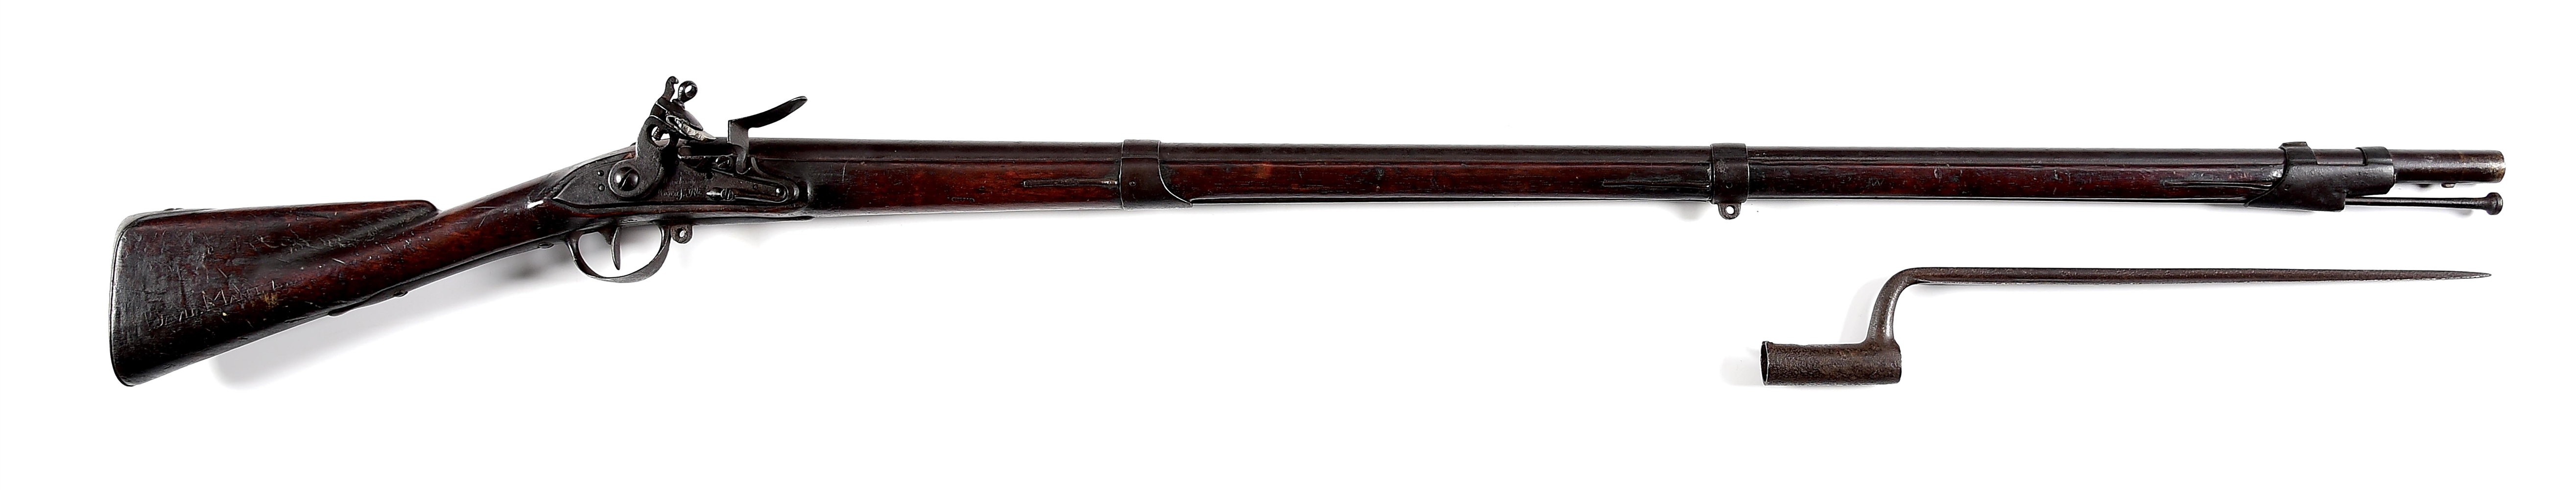 (A) FRENCH MODEL 1766/68 MAUBEUGE MUSKET WITH STATE OF MARYLAND PROPERTY BRAND AND CARVED IDENTIFICATION TO DAVID MANTZ.